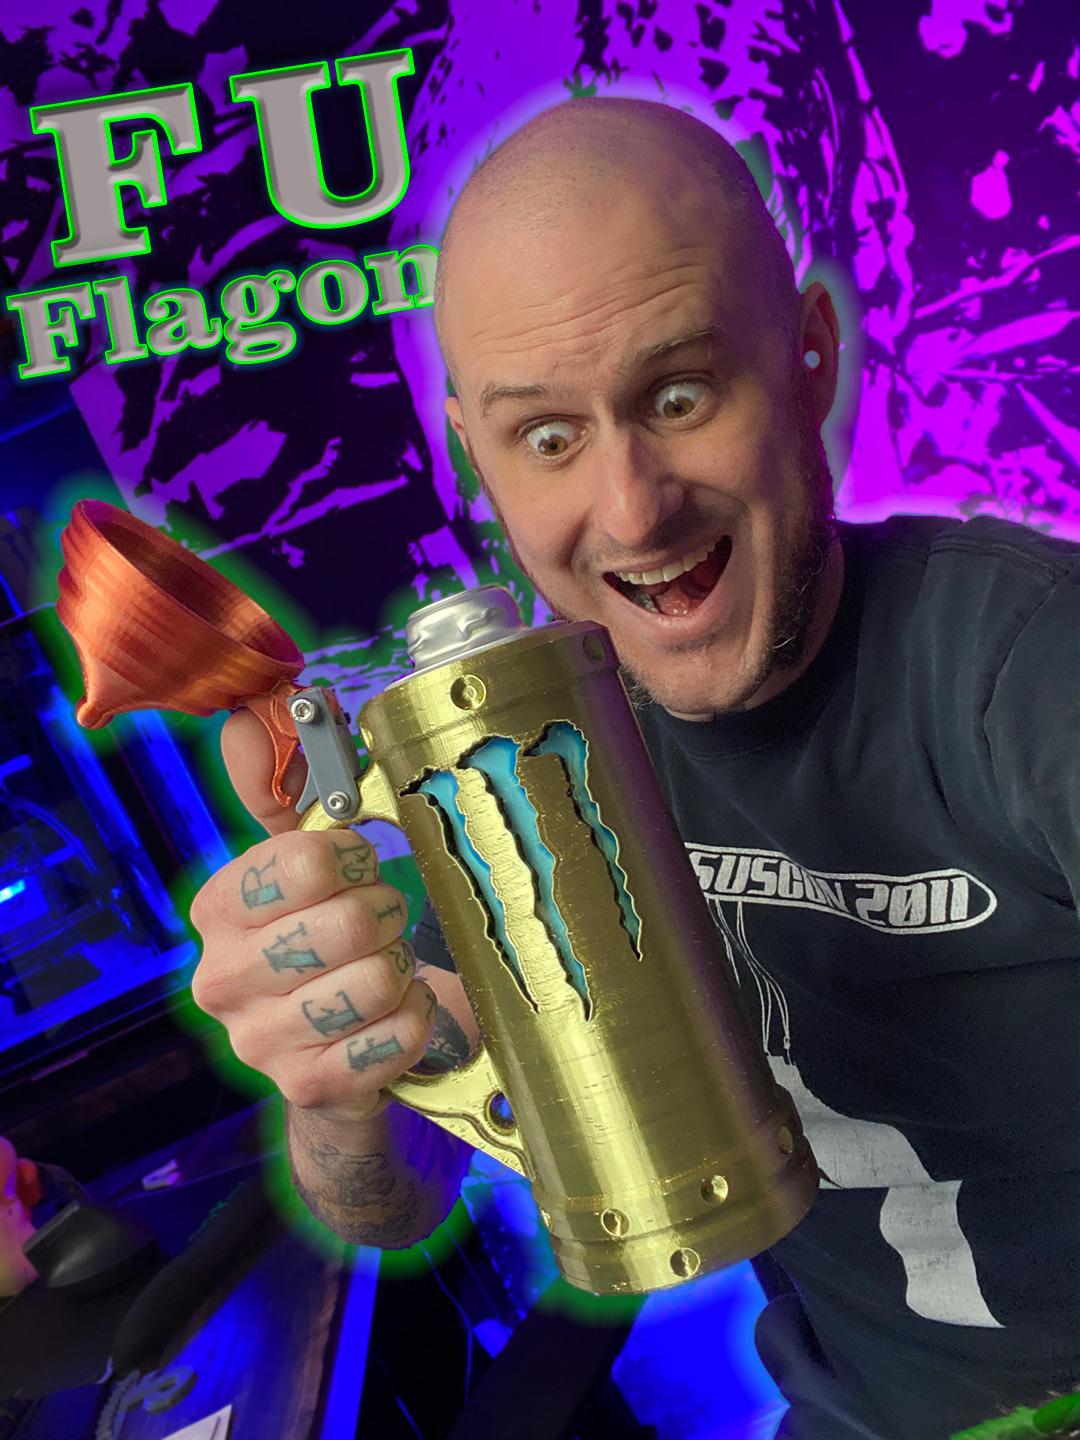 F U Flagon - 24oz Munster Can Stein - Franken STEIN Monster - Kyle Cup XXL - The FU Flagon, Monster Energy 24oz Twist Top Can Stein with flipping lid! - 3d model